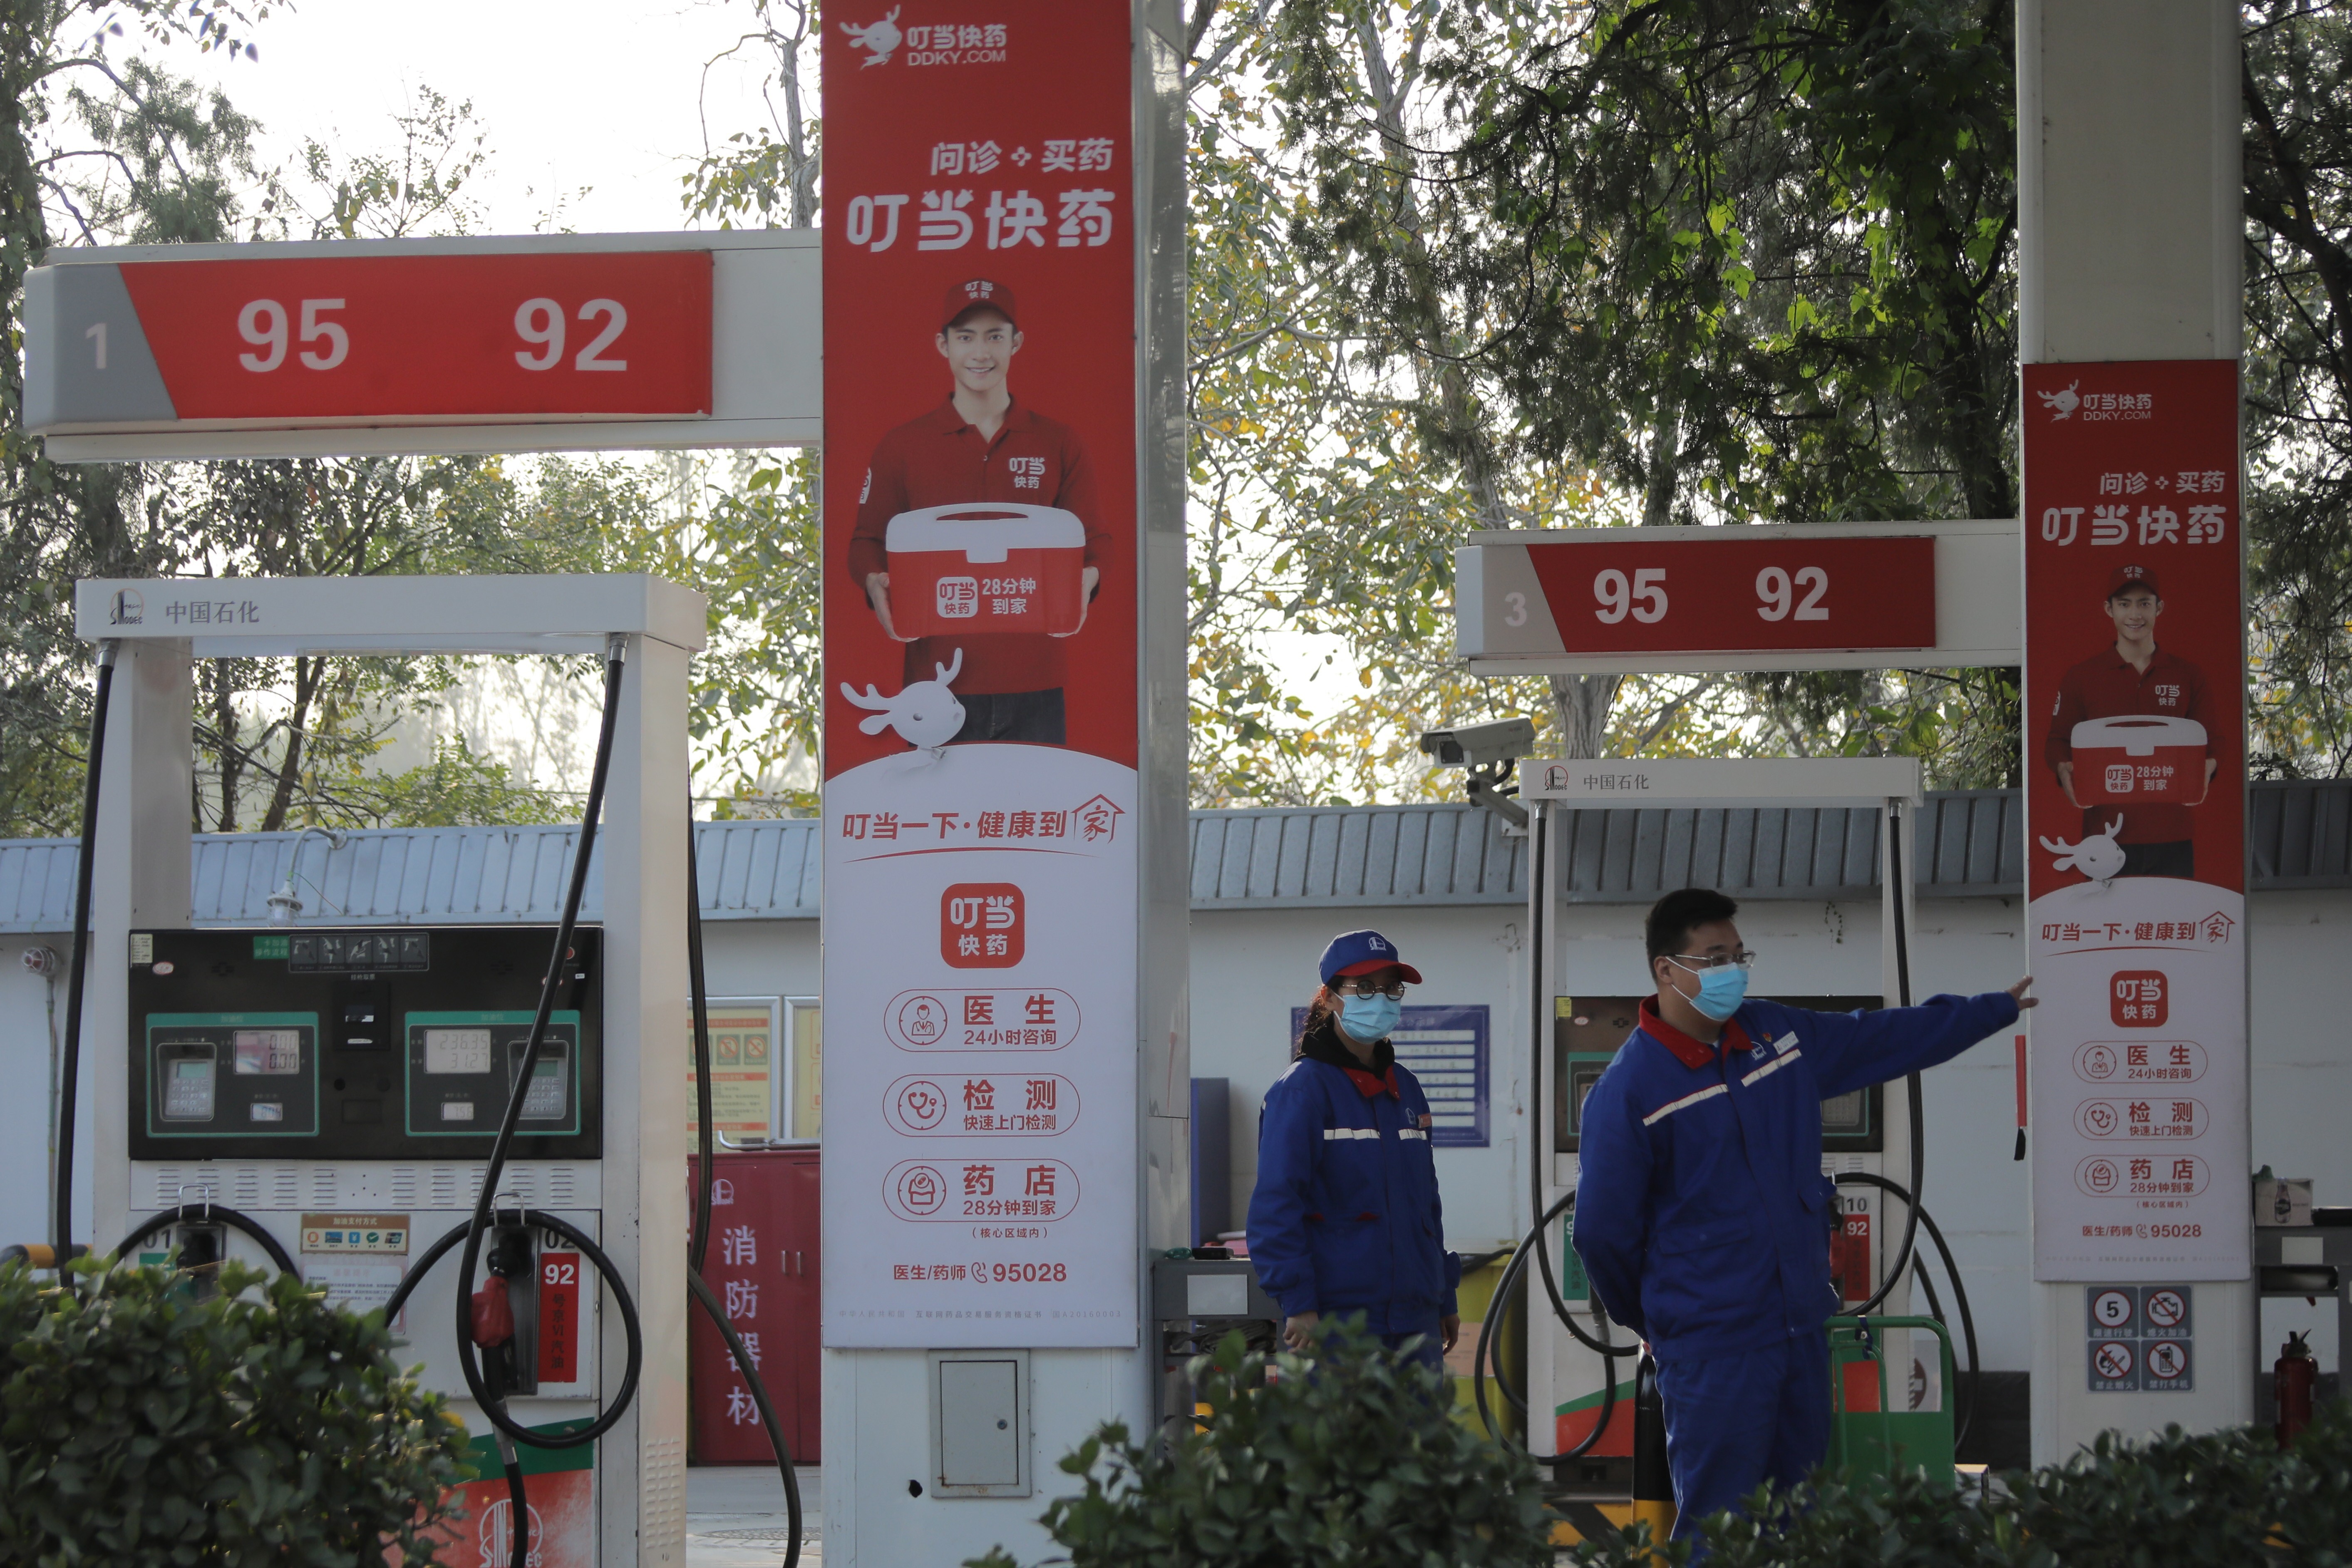 Soaring diesel prices are putting pressure on China’s independent truck drivers. Photo: EPA-EFE